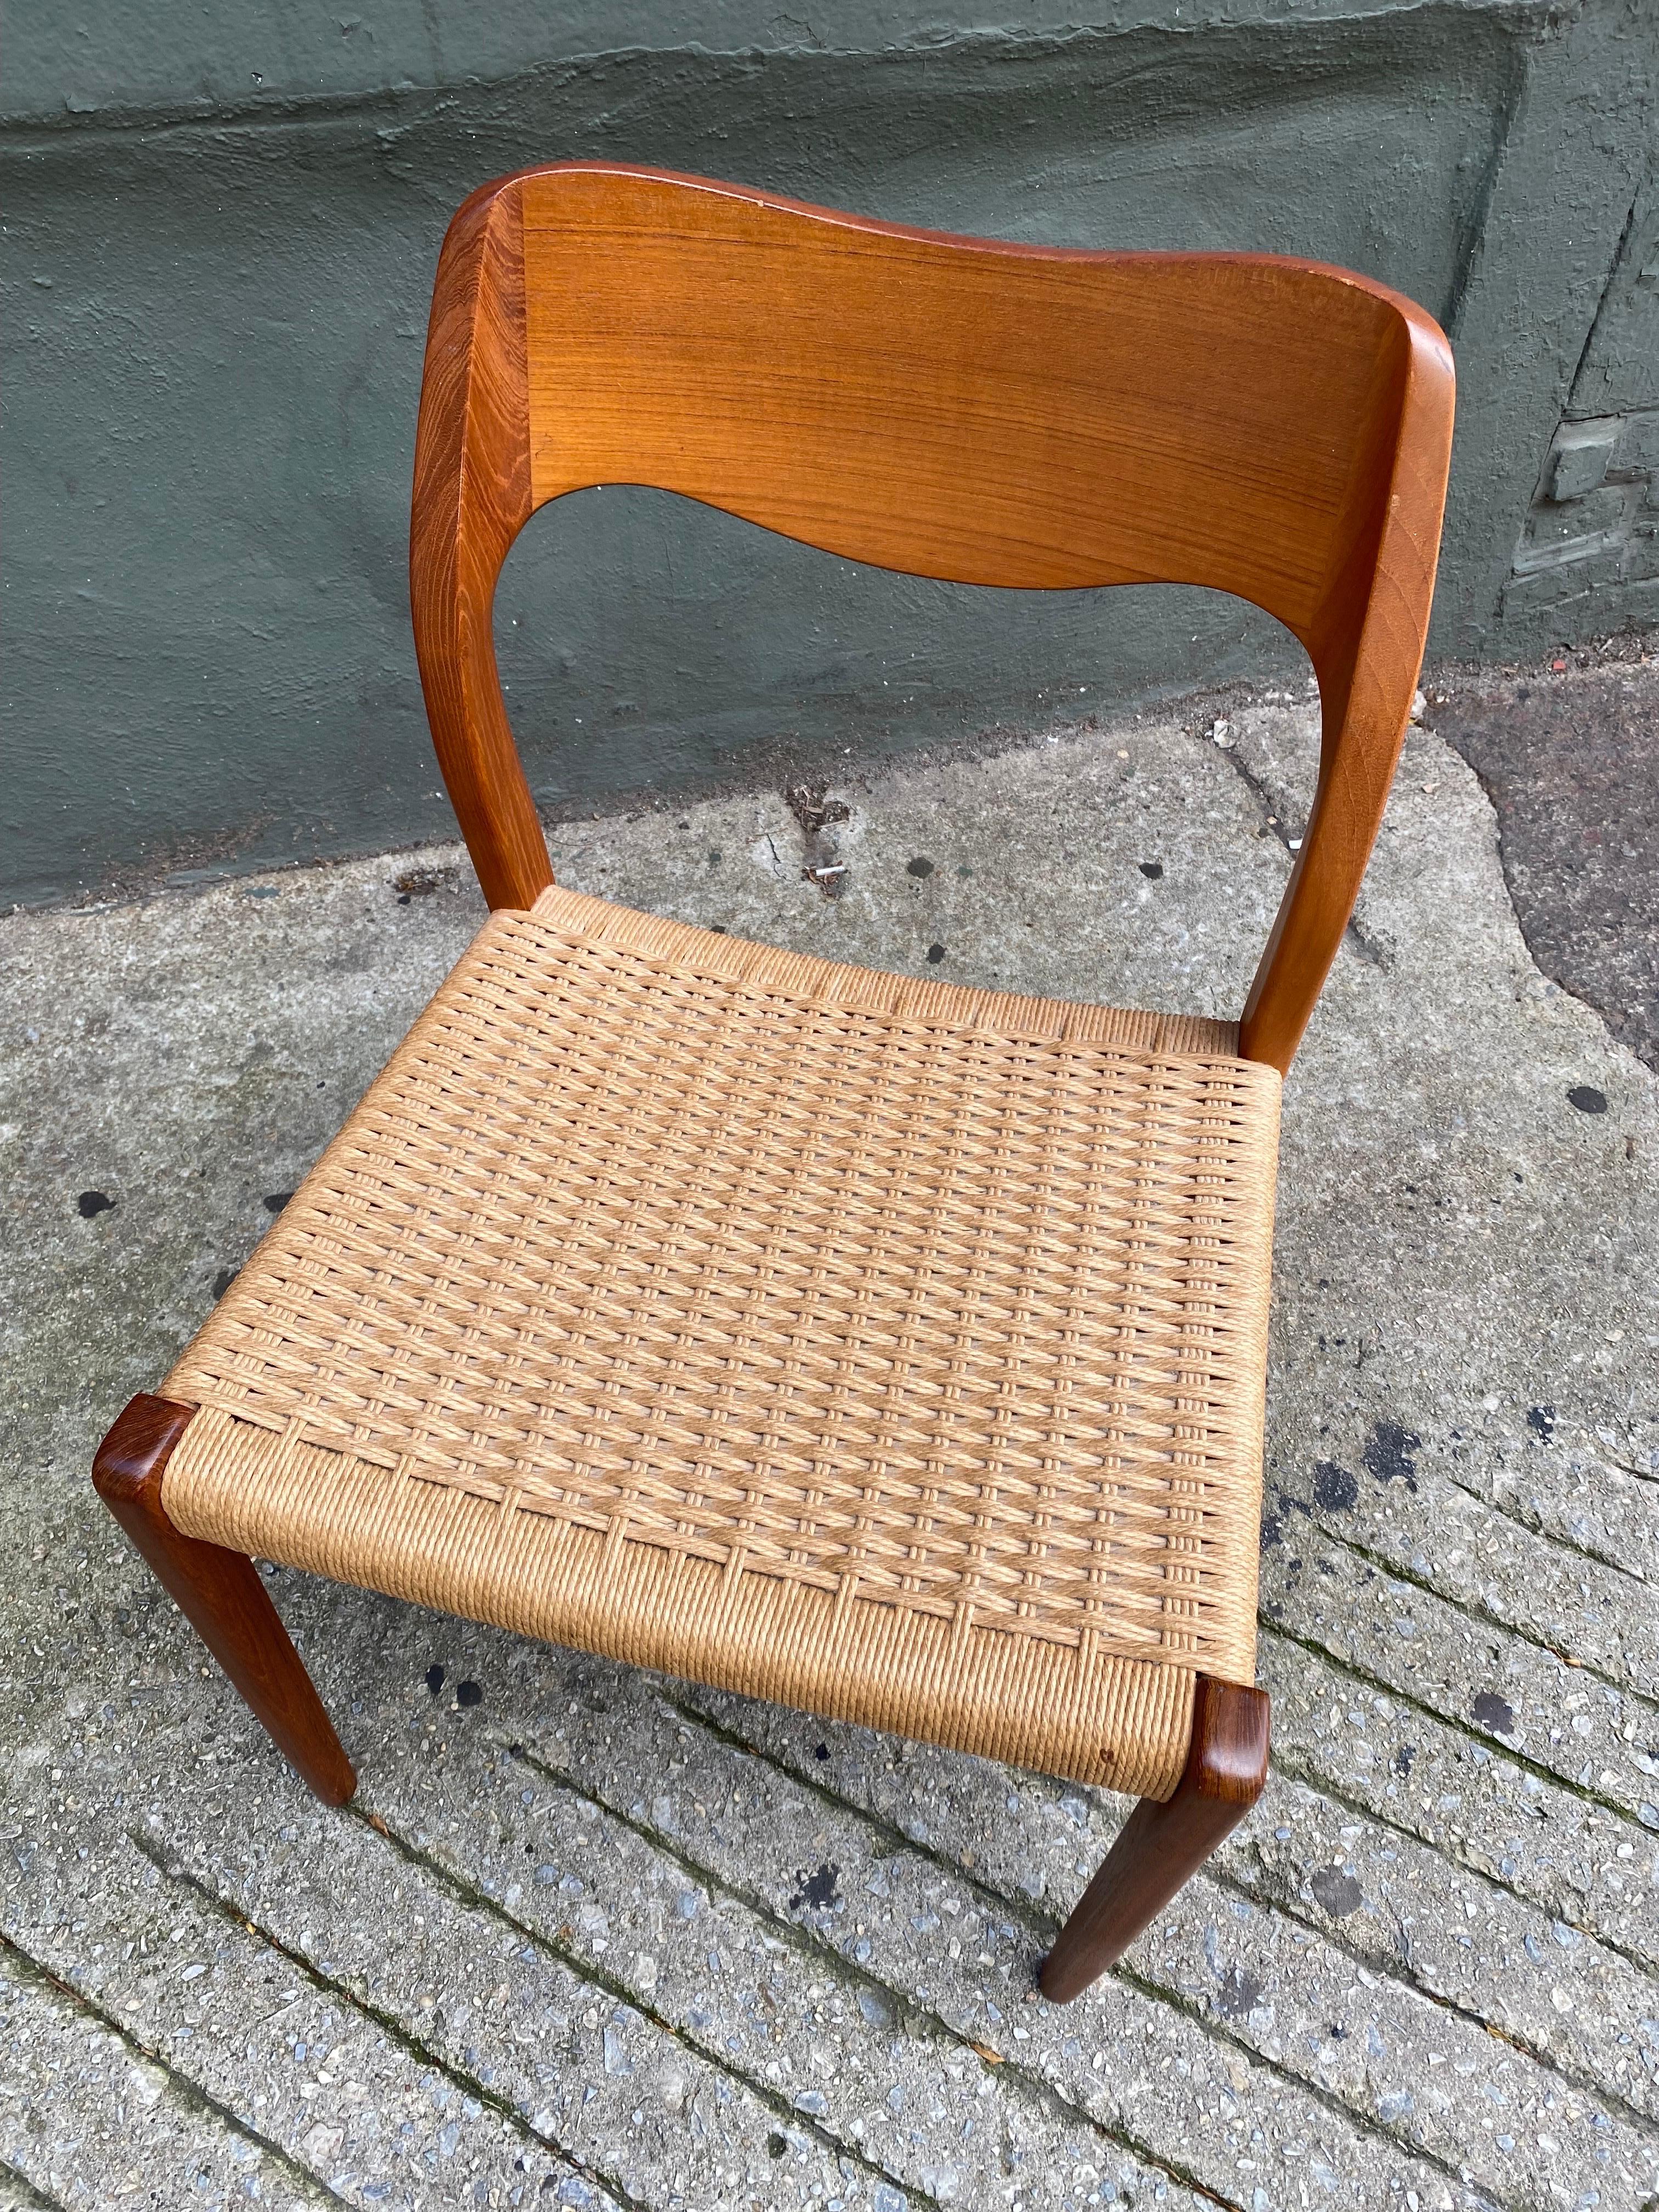 Moller Teak Dining Chair with papercord seat model 71.  Very clean example, wood very nice.  Retains label to underside.